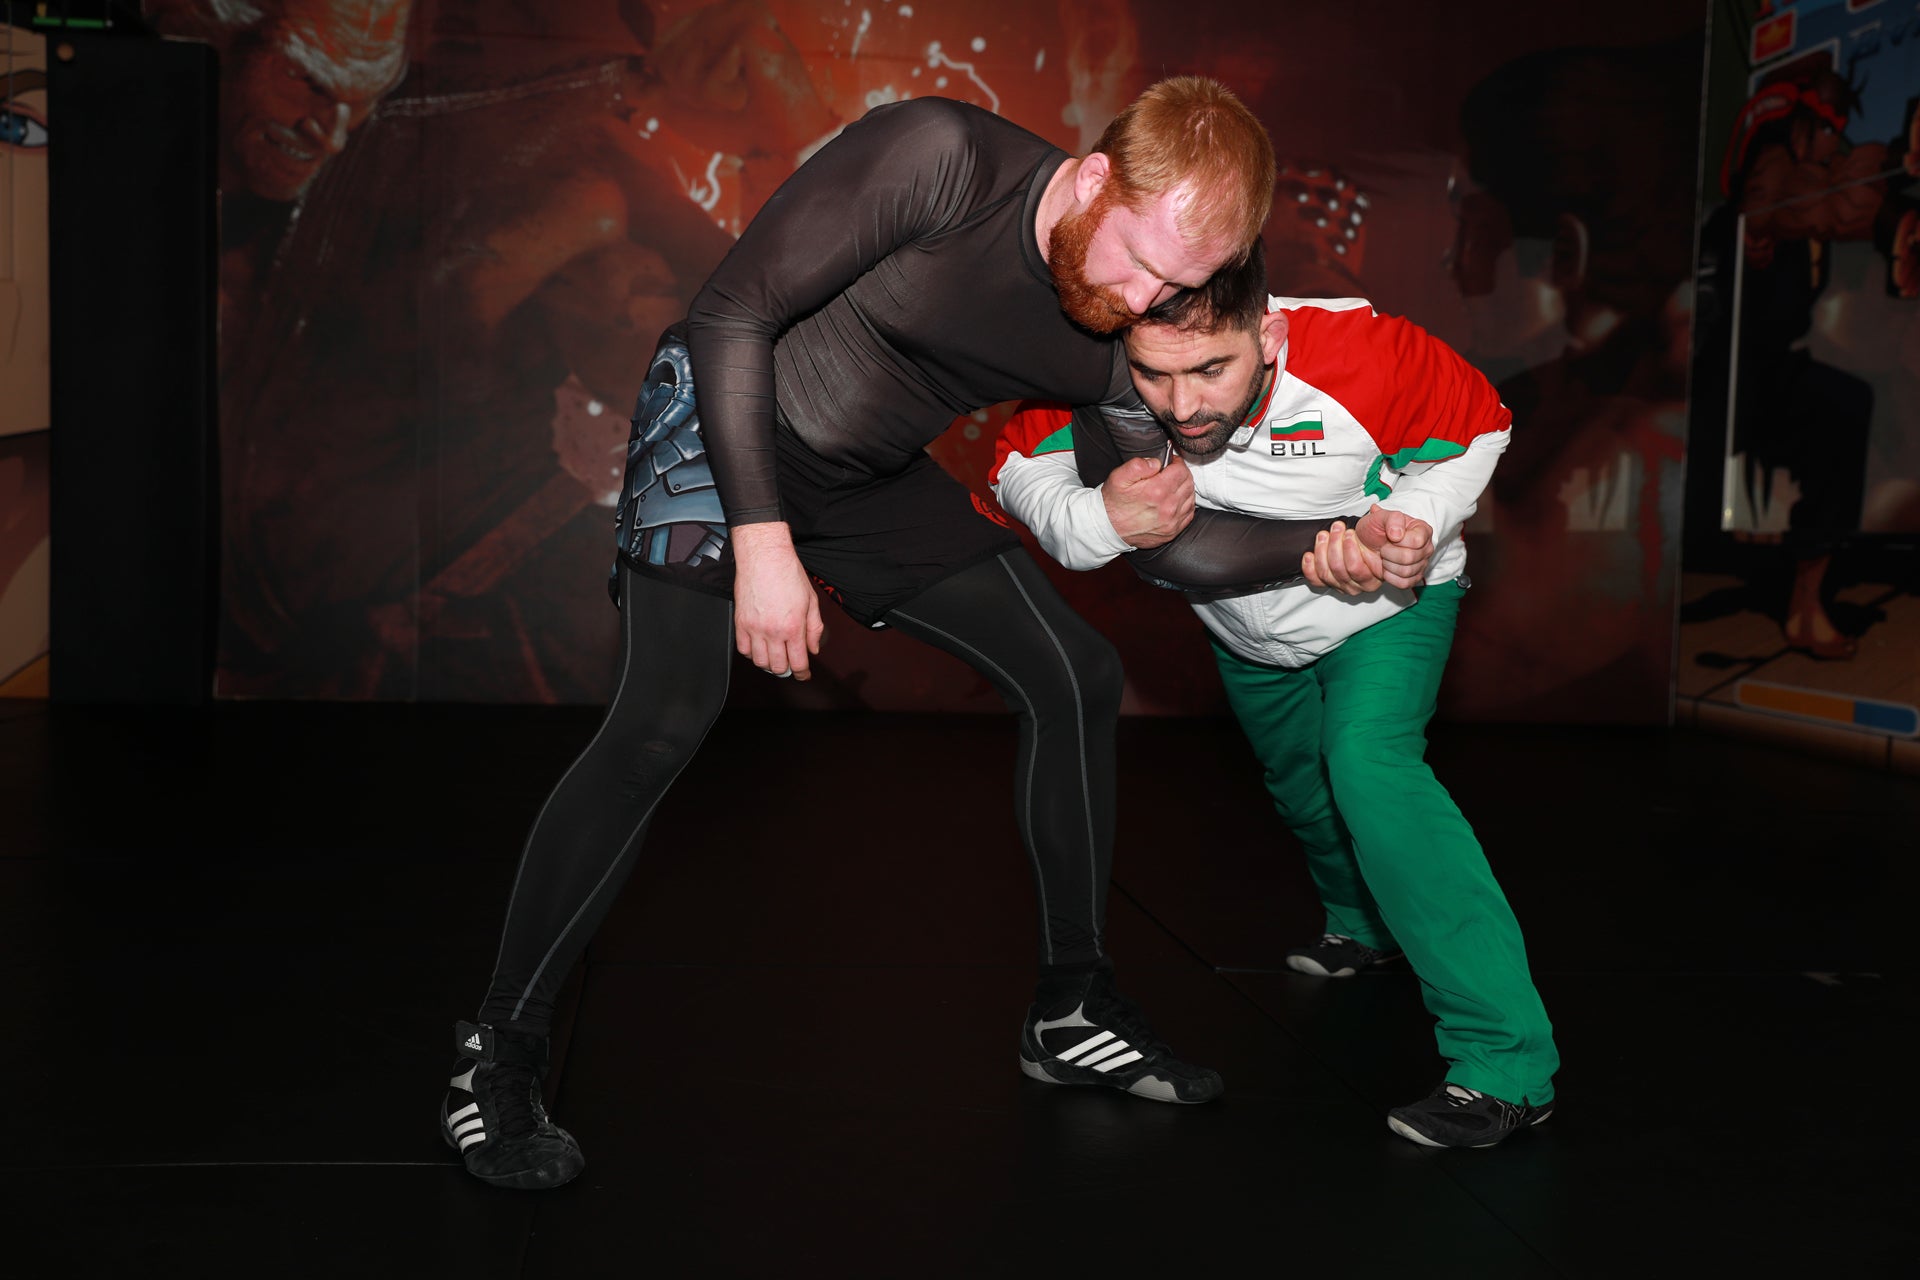 A photo of an athlete demonstrating setting up a takedown